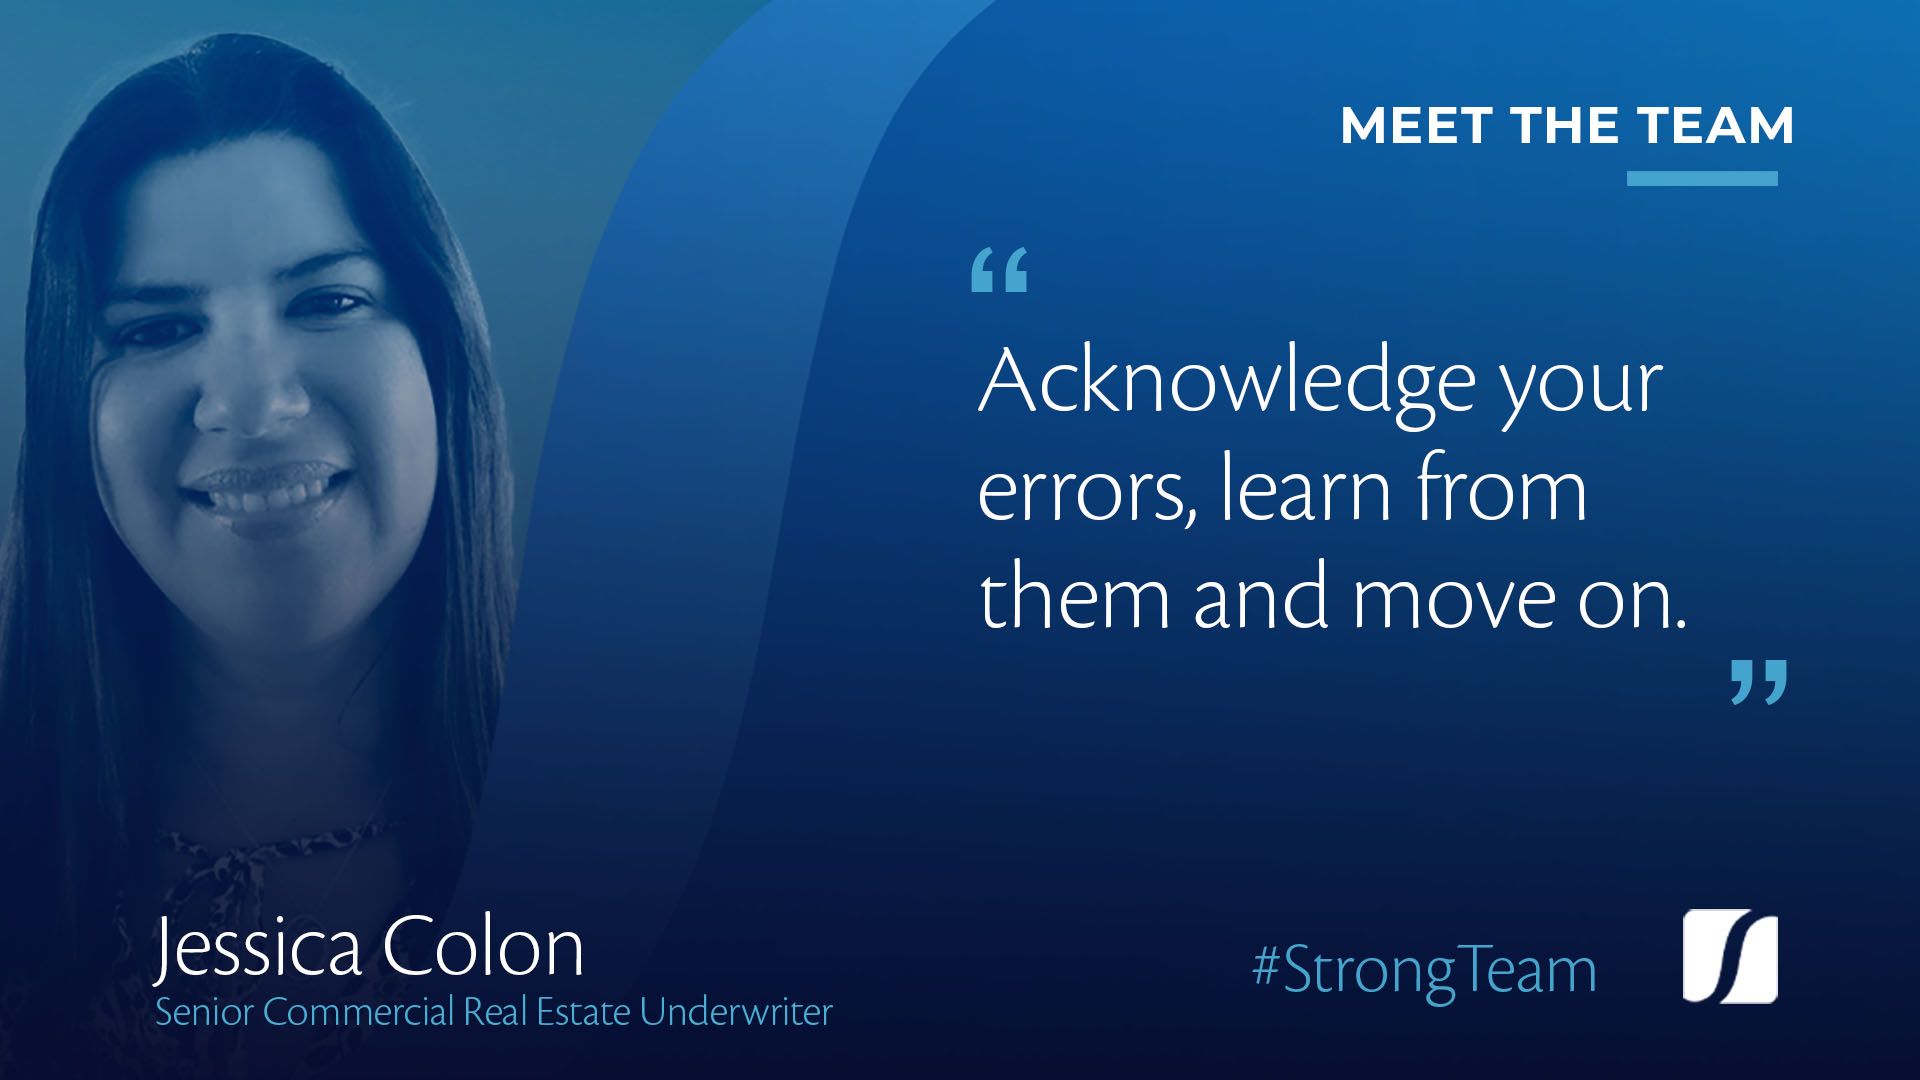 Meet Jessica Colon, a Senior Commercial Real Estate Underwriter at Stronghill